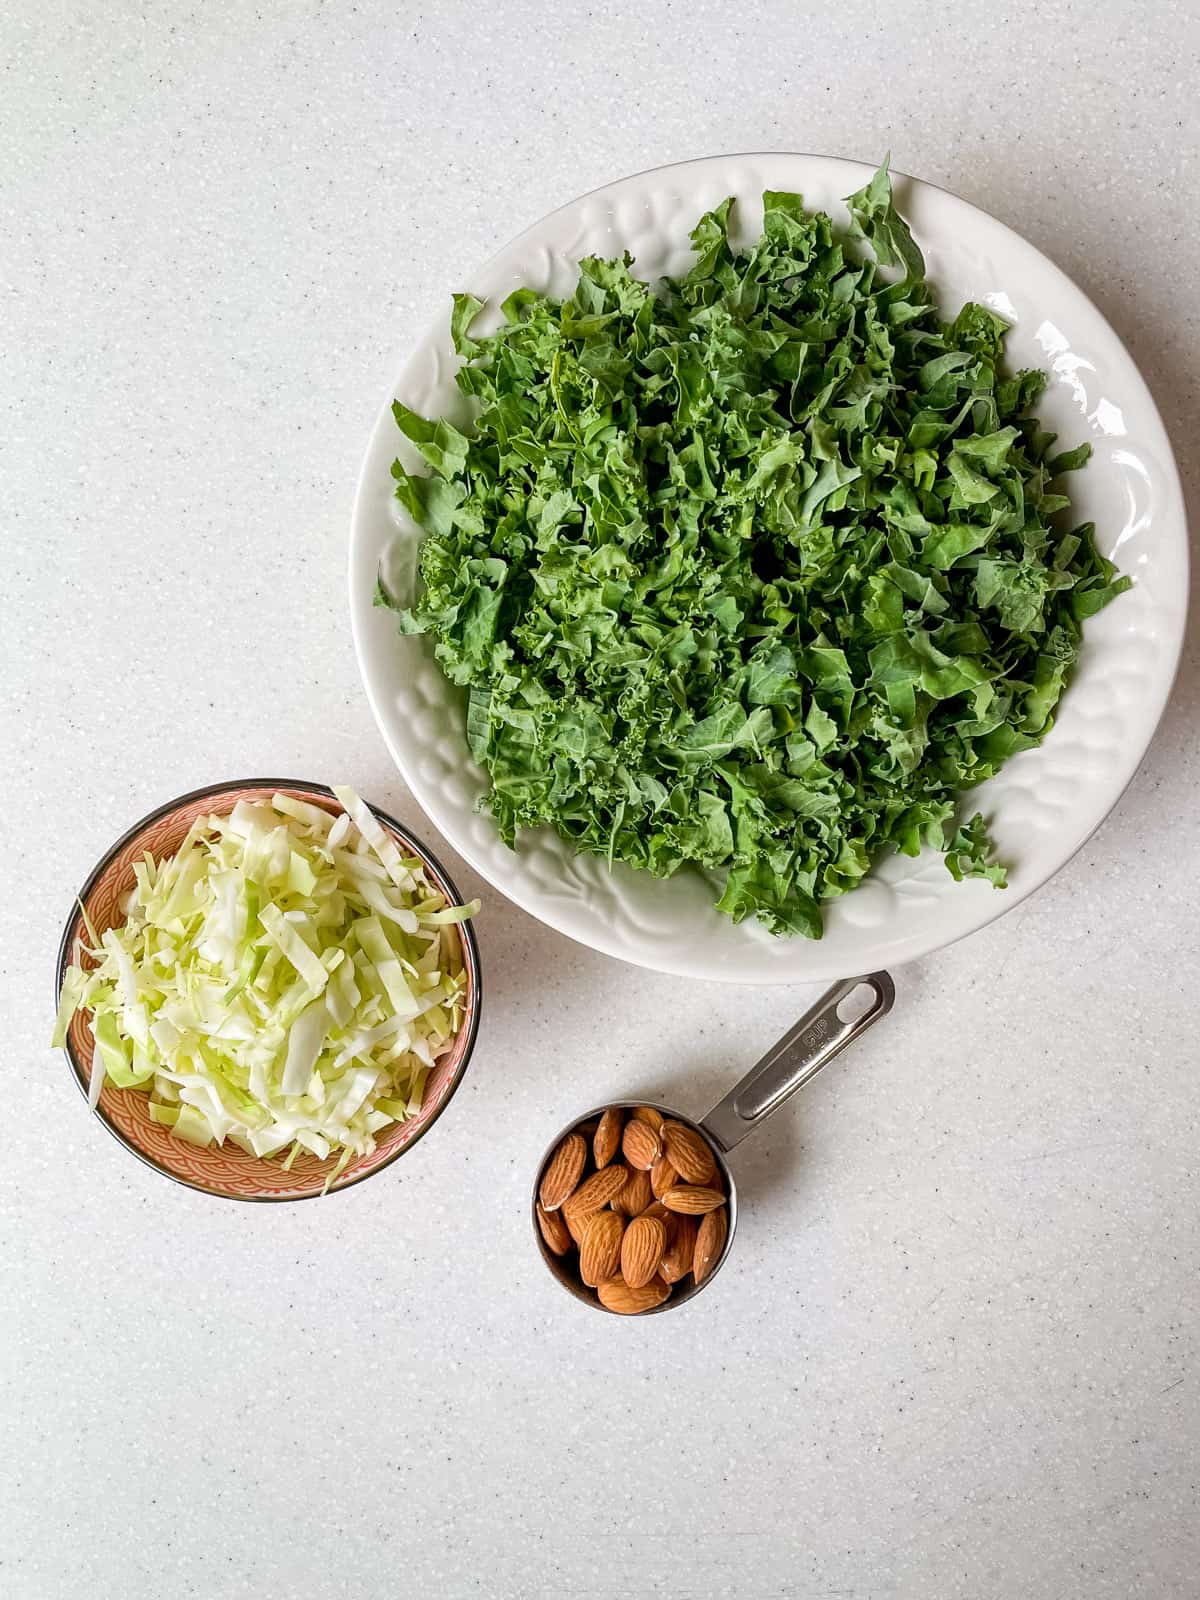 finely chopped kale in bowl, next to shredded green cabbage and almonds.